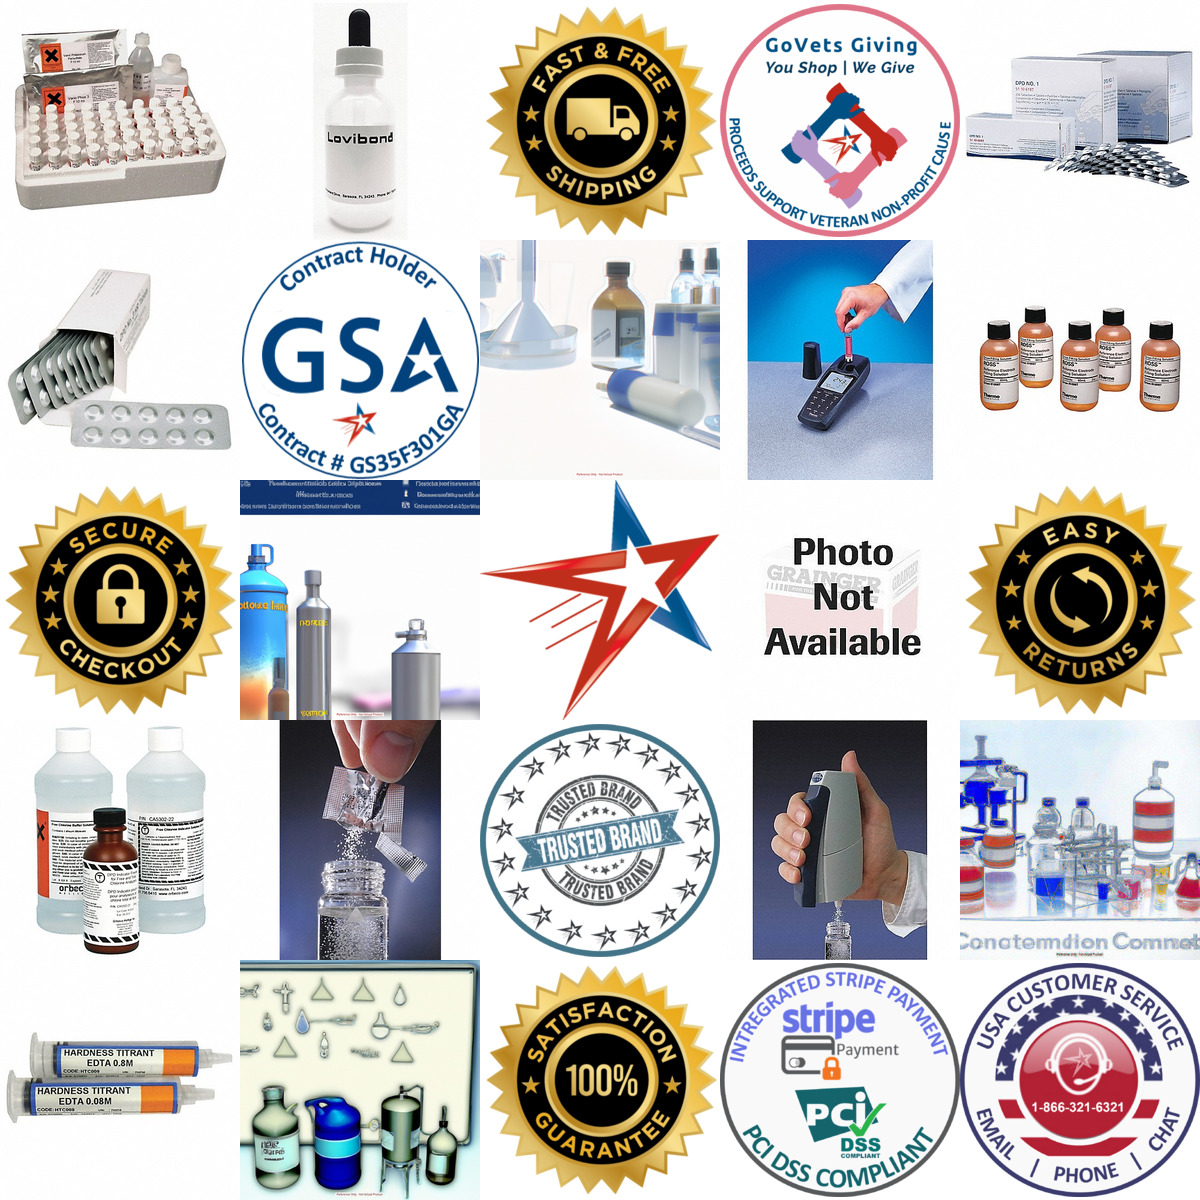 A selection of Reagents and Refills products on GoVets